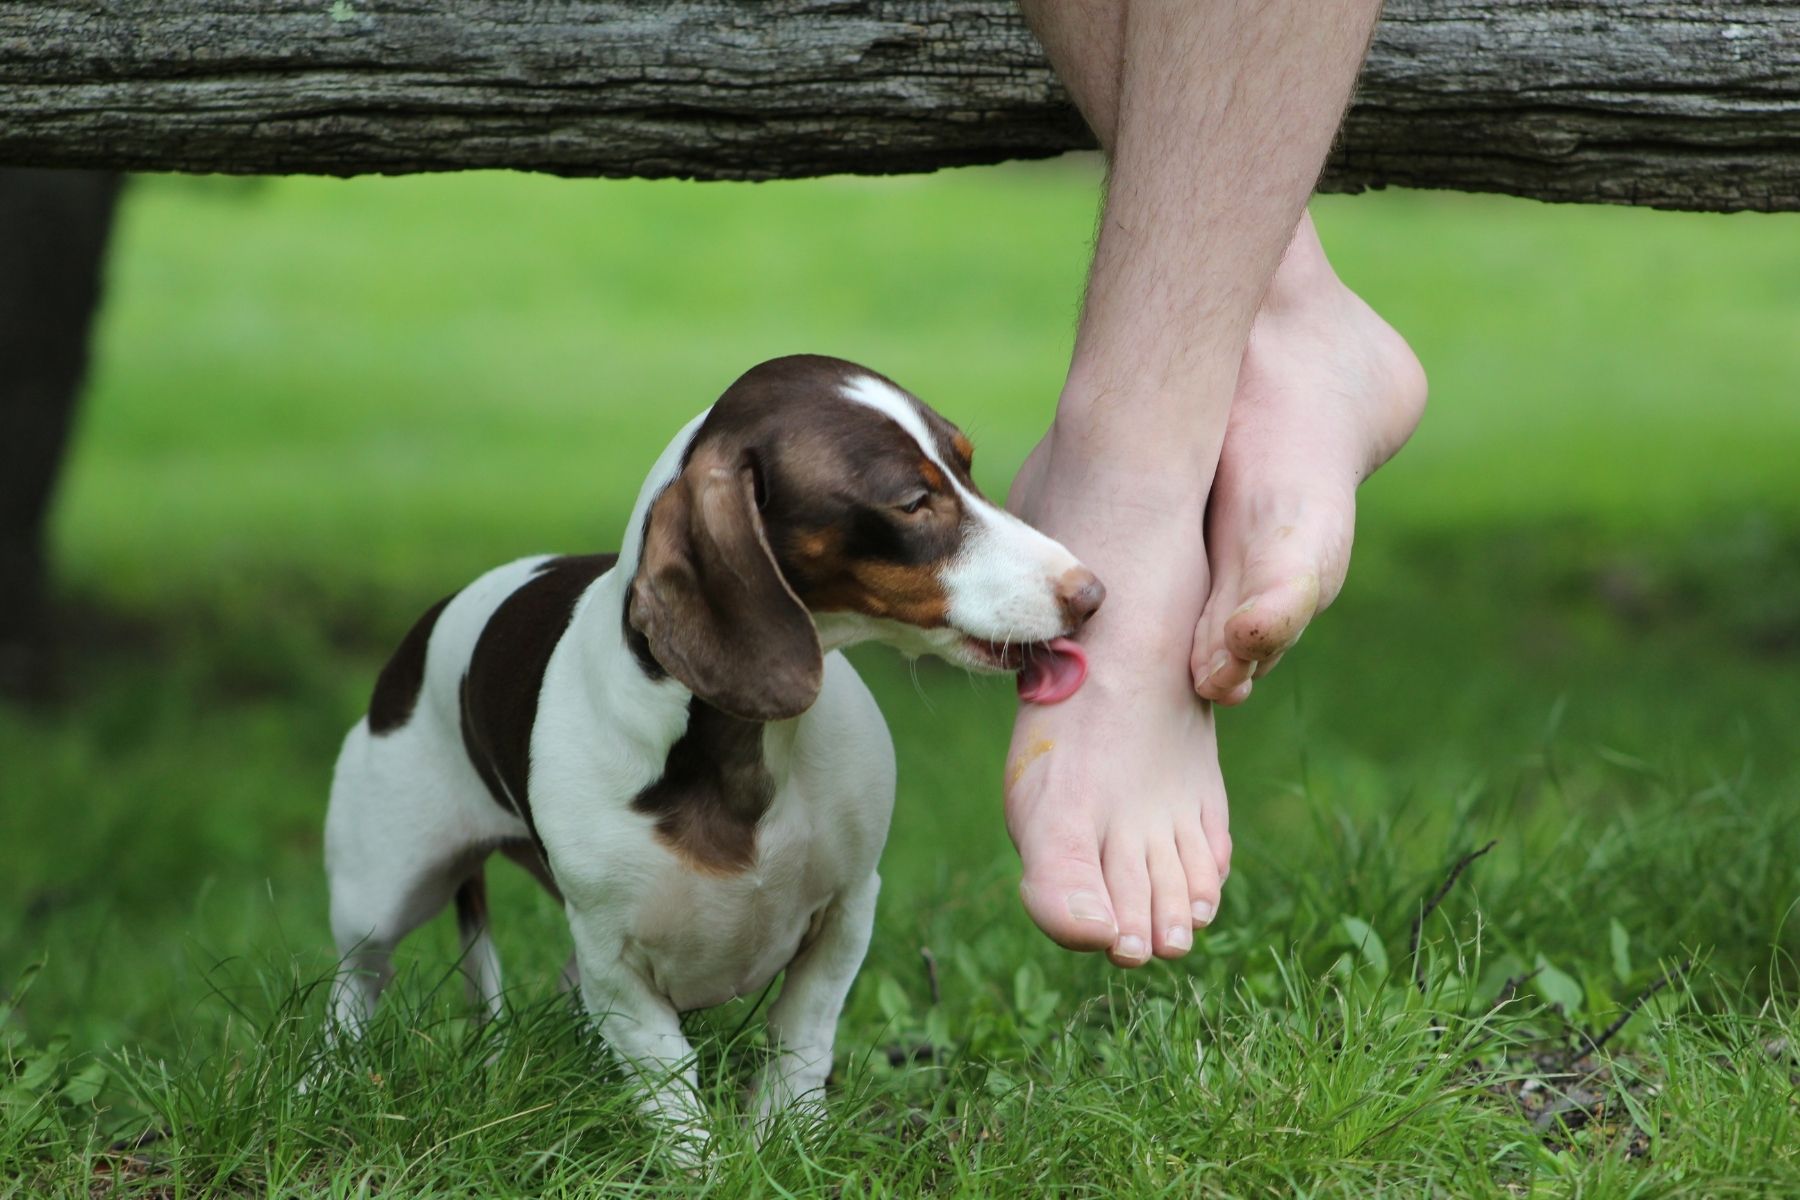 Cute dog licking the leg and foot of his owner